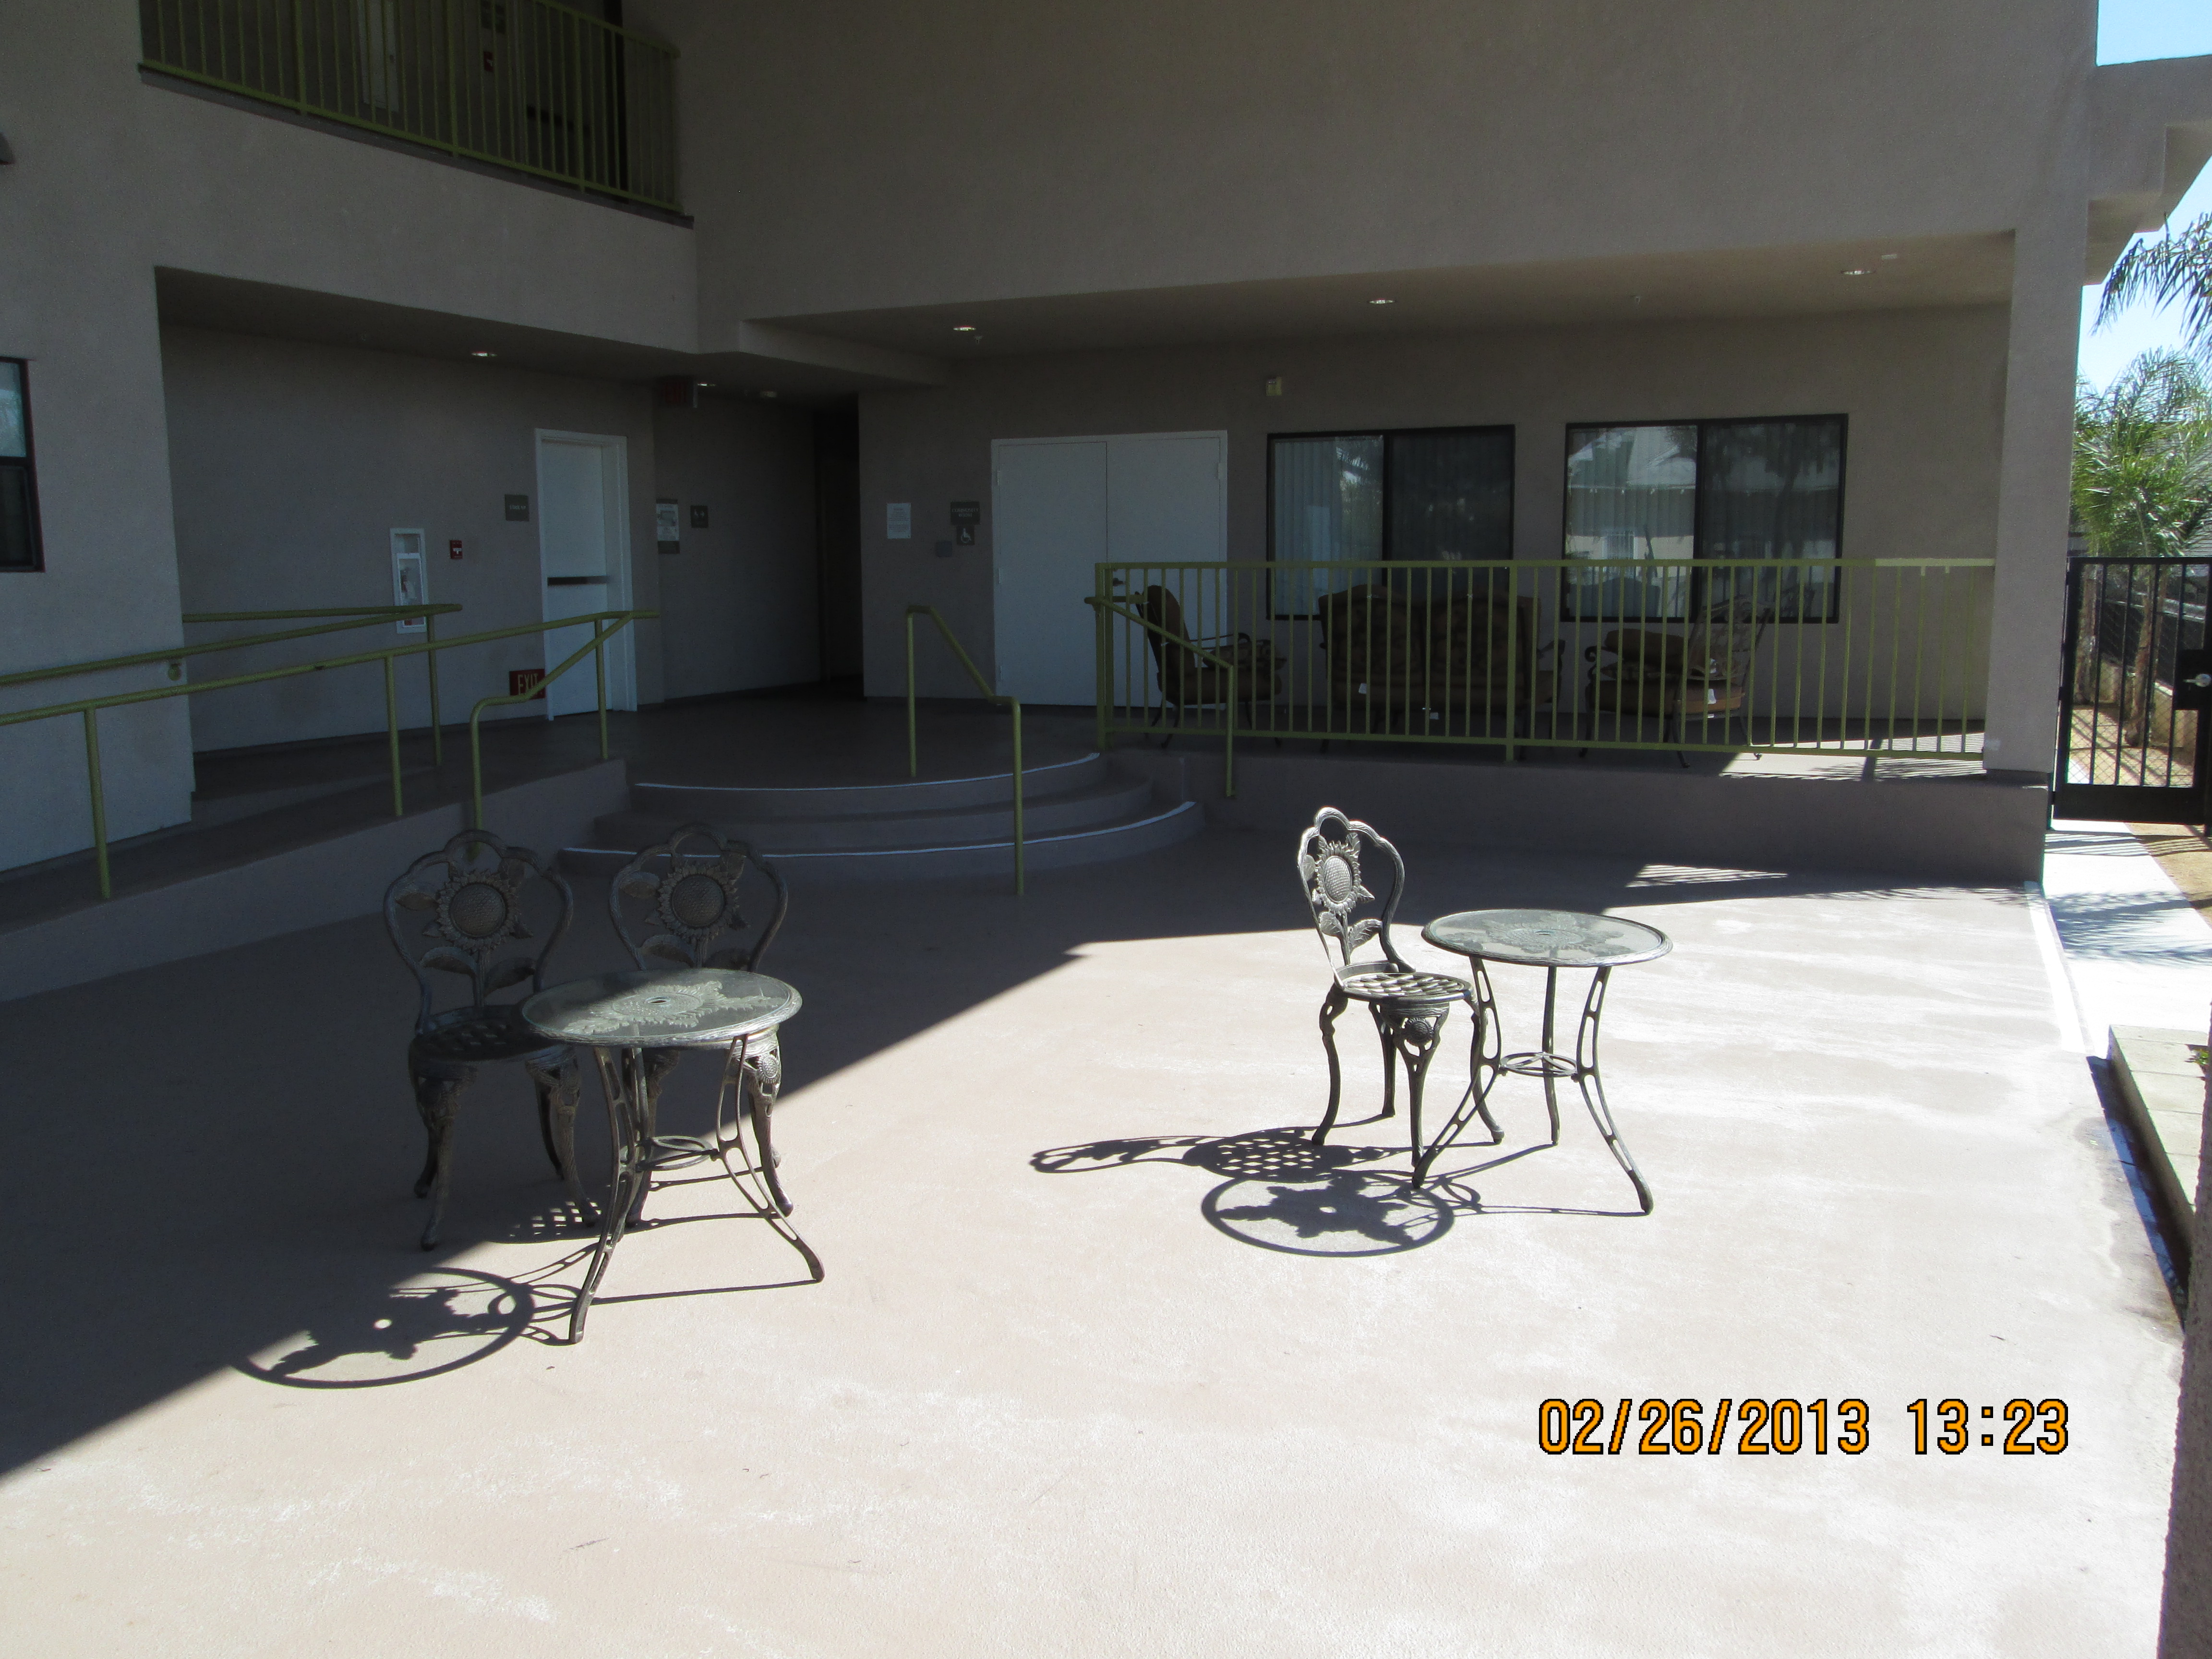 Exterior view of the patio area of Las Margaritas showing two small round tables with chairs